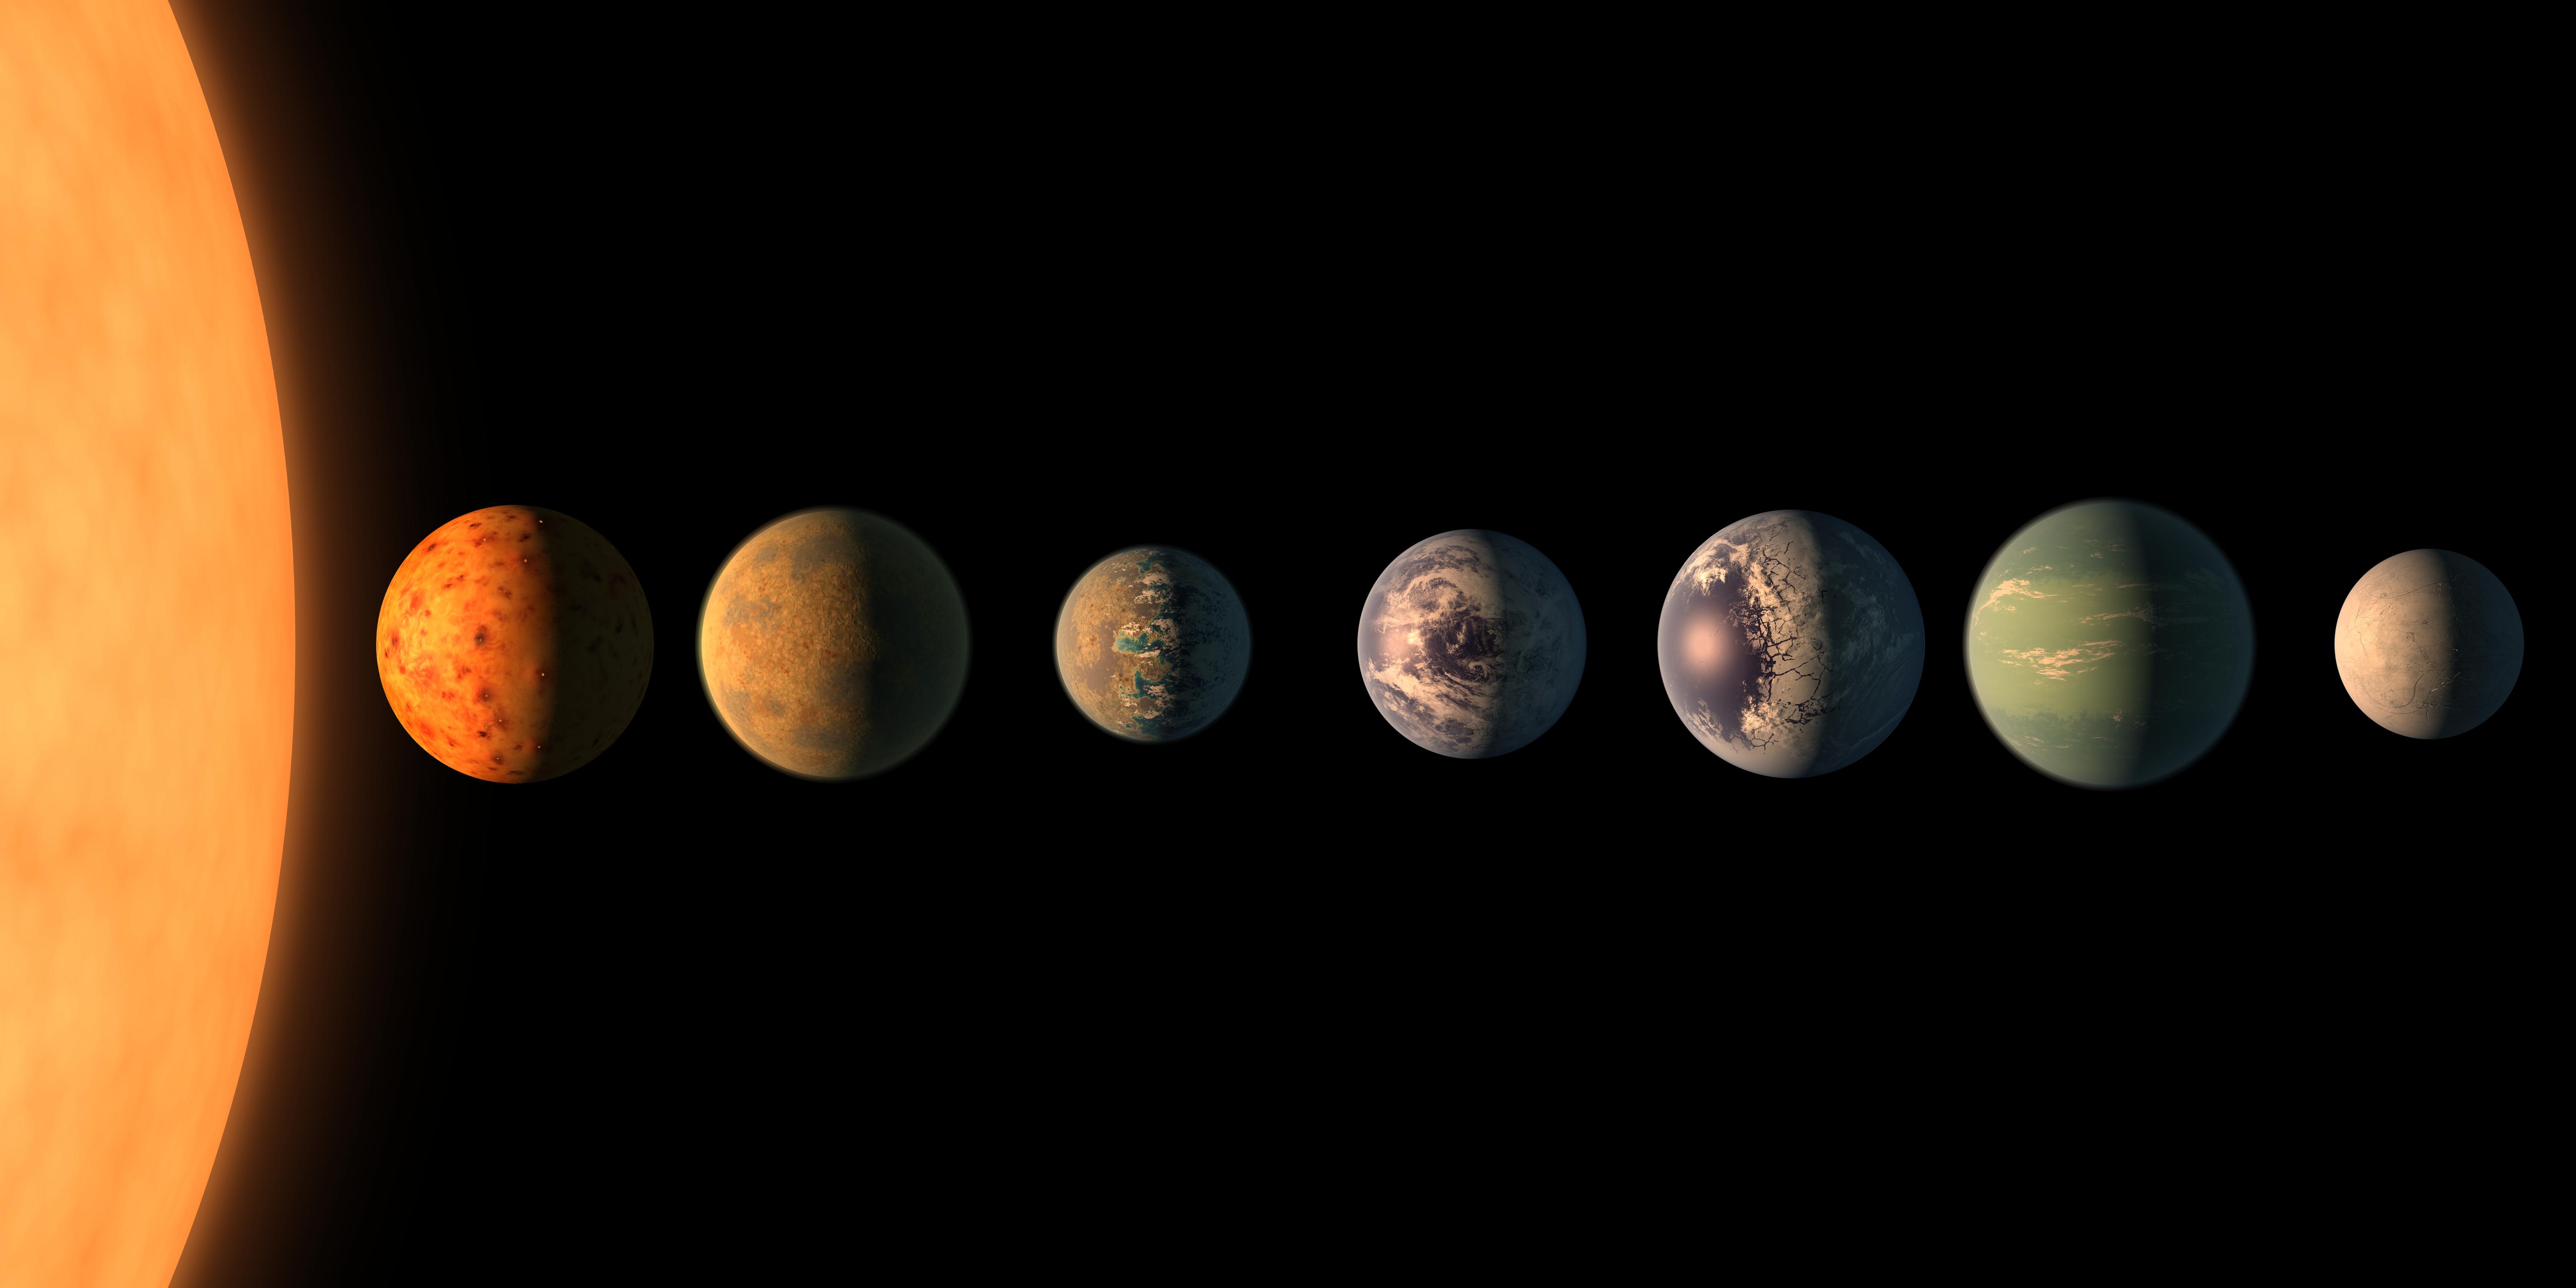 In 2016, Dr Gillon discovered a system of seven Earth-sized planets orbiting an ultra-cool dwarf called TRAPPIST-1 (artist's impression). Image credit - NASA/JPL-Caltech